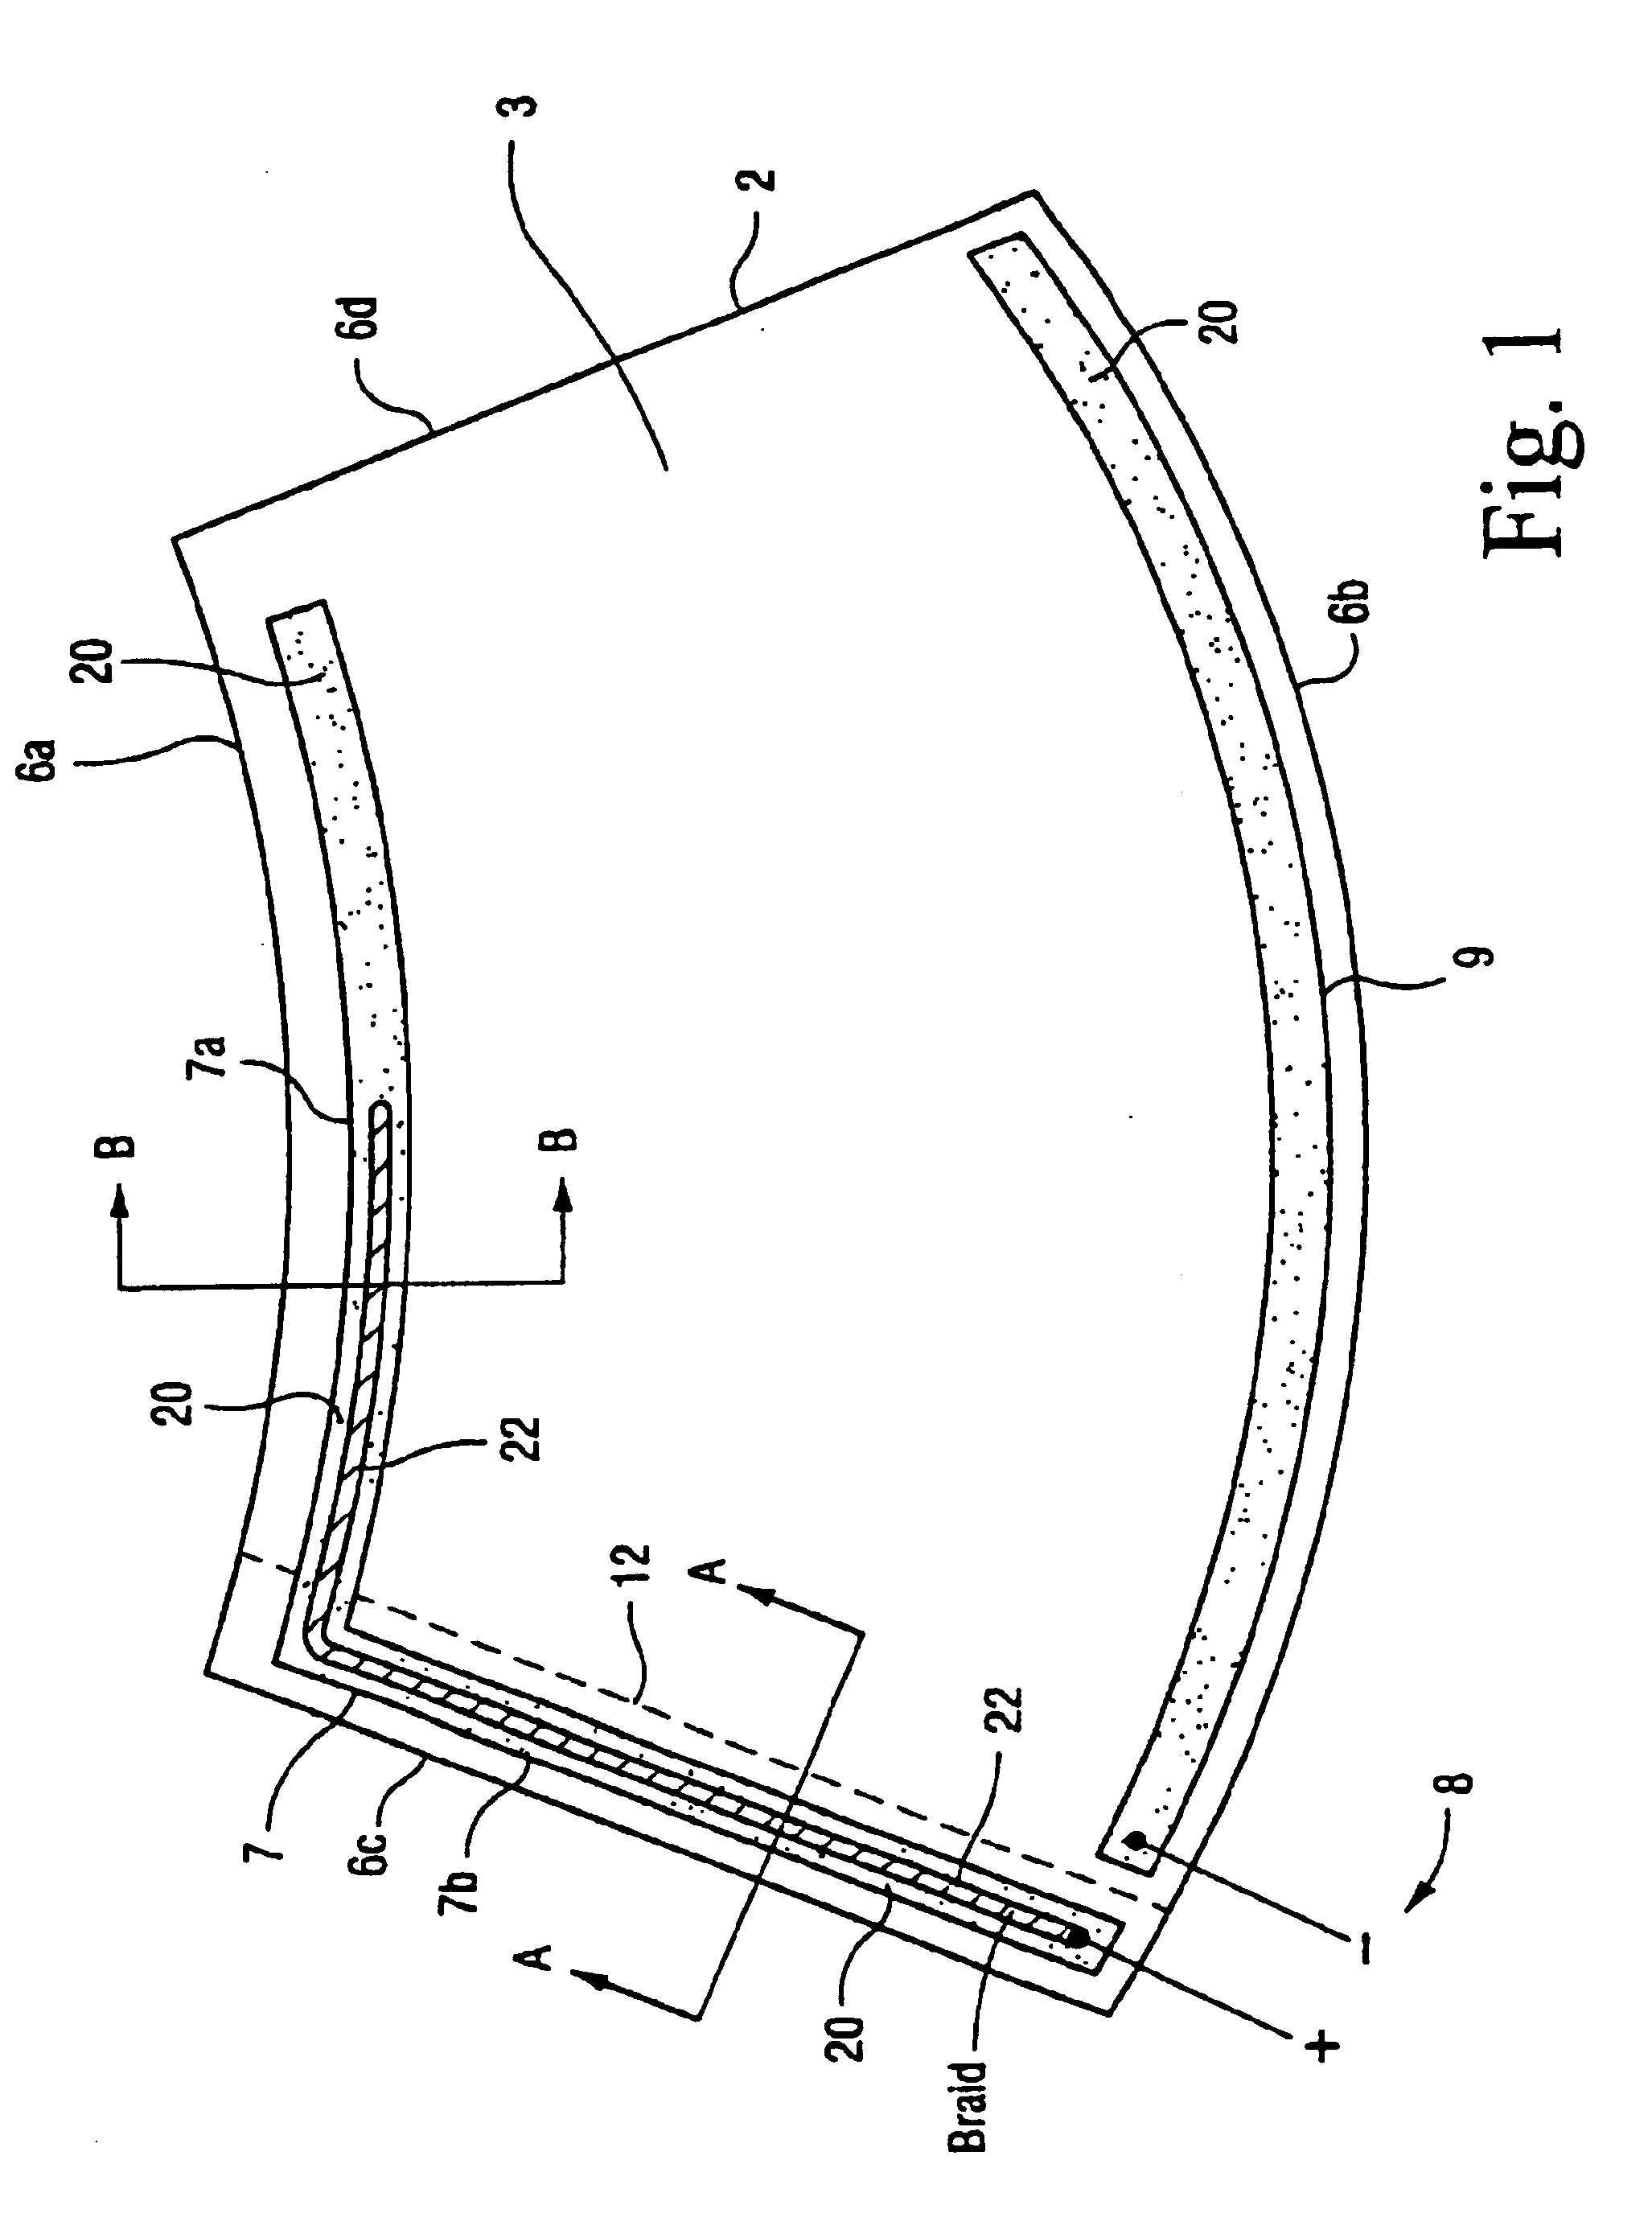 Heatable vehicle windshield with bus bars including braided and printed portions